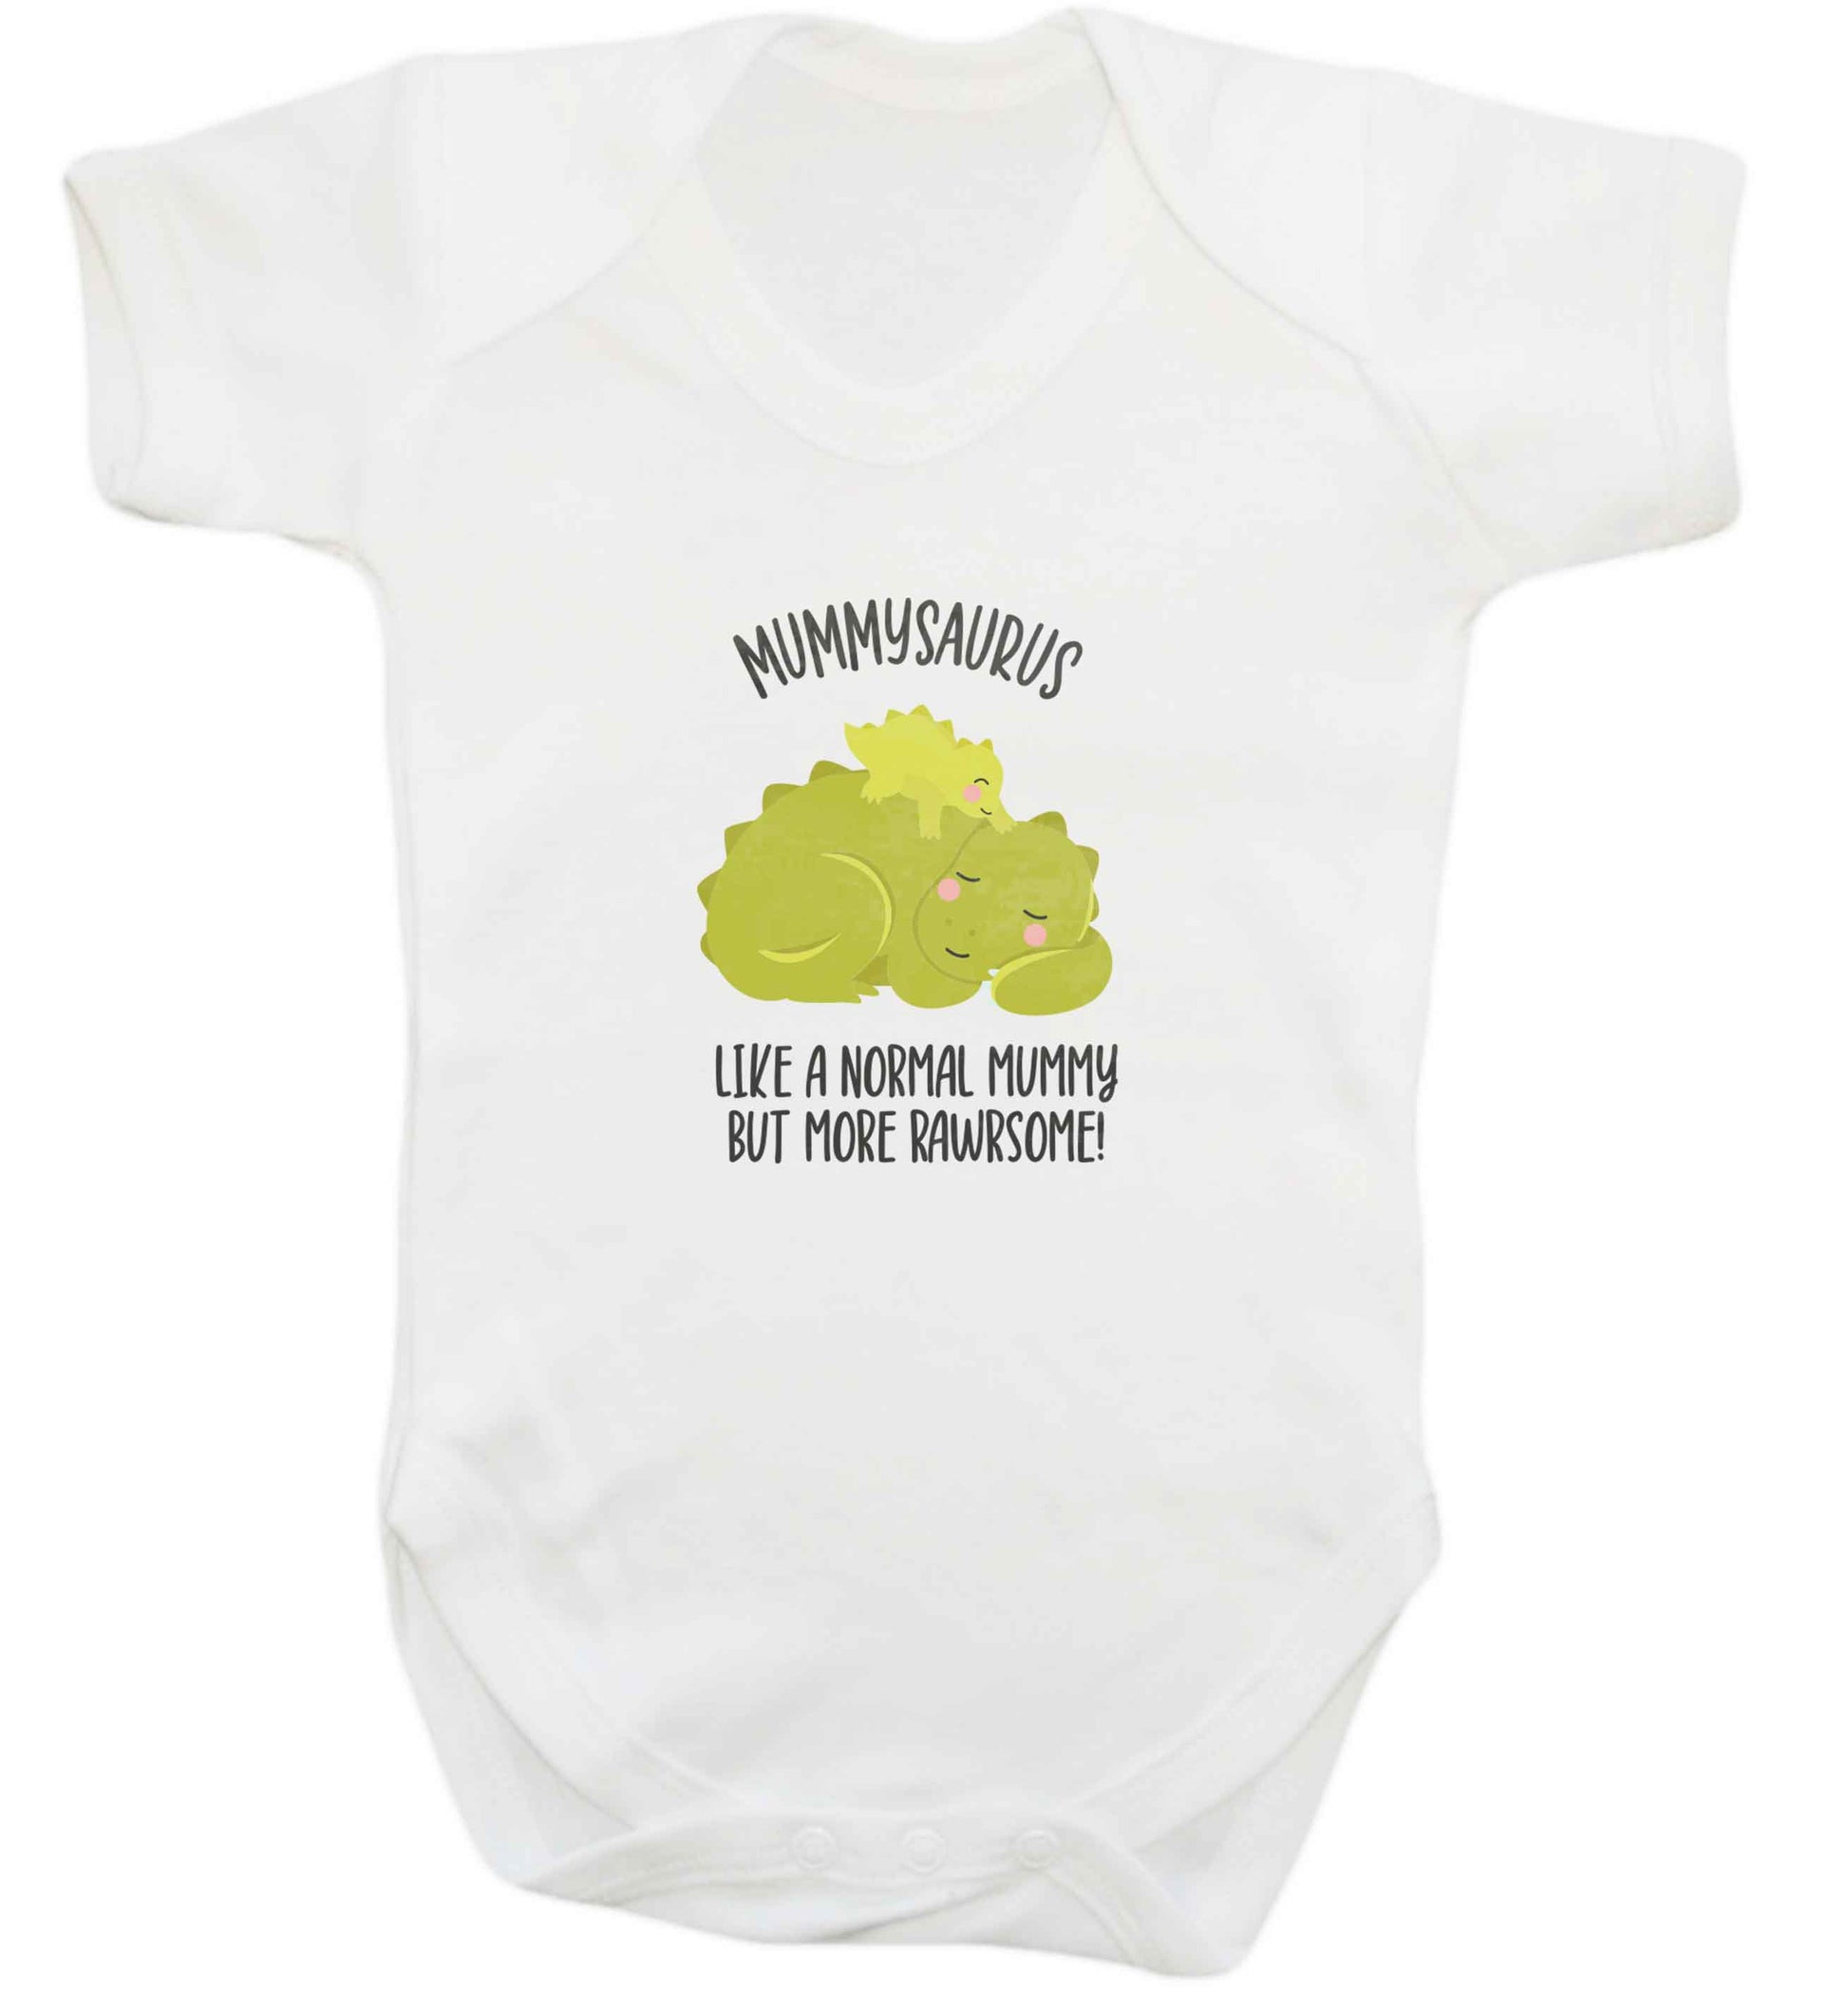 Mummysaurus like a normal mummy only more rawrsome baby vest white 18-24 months